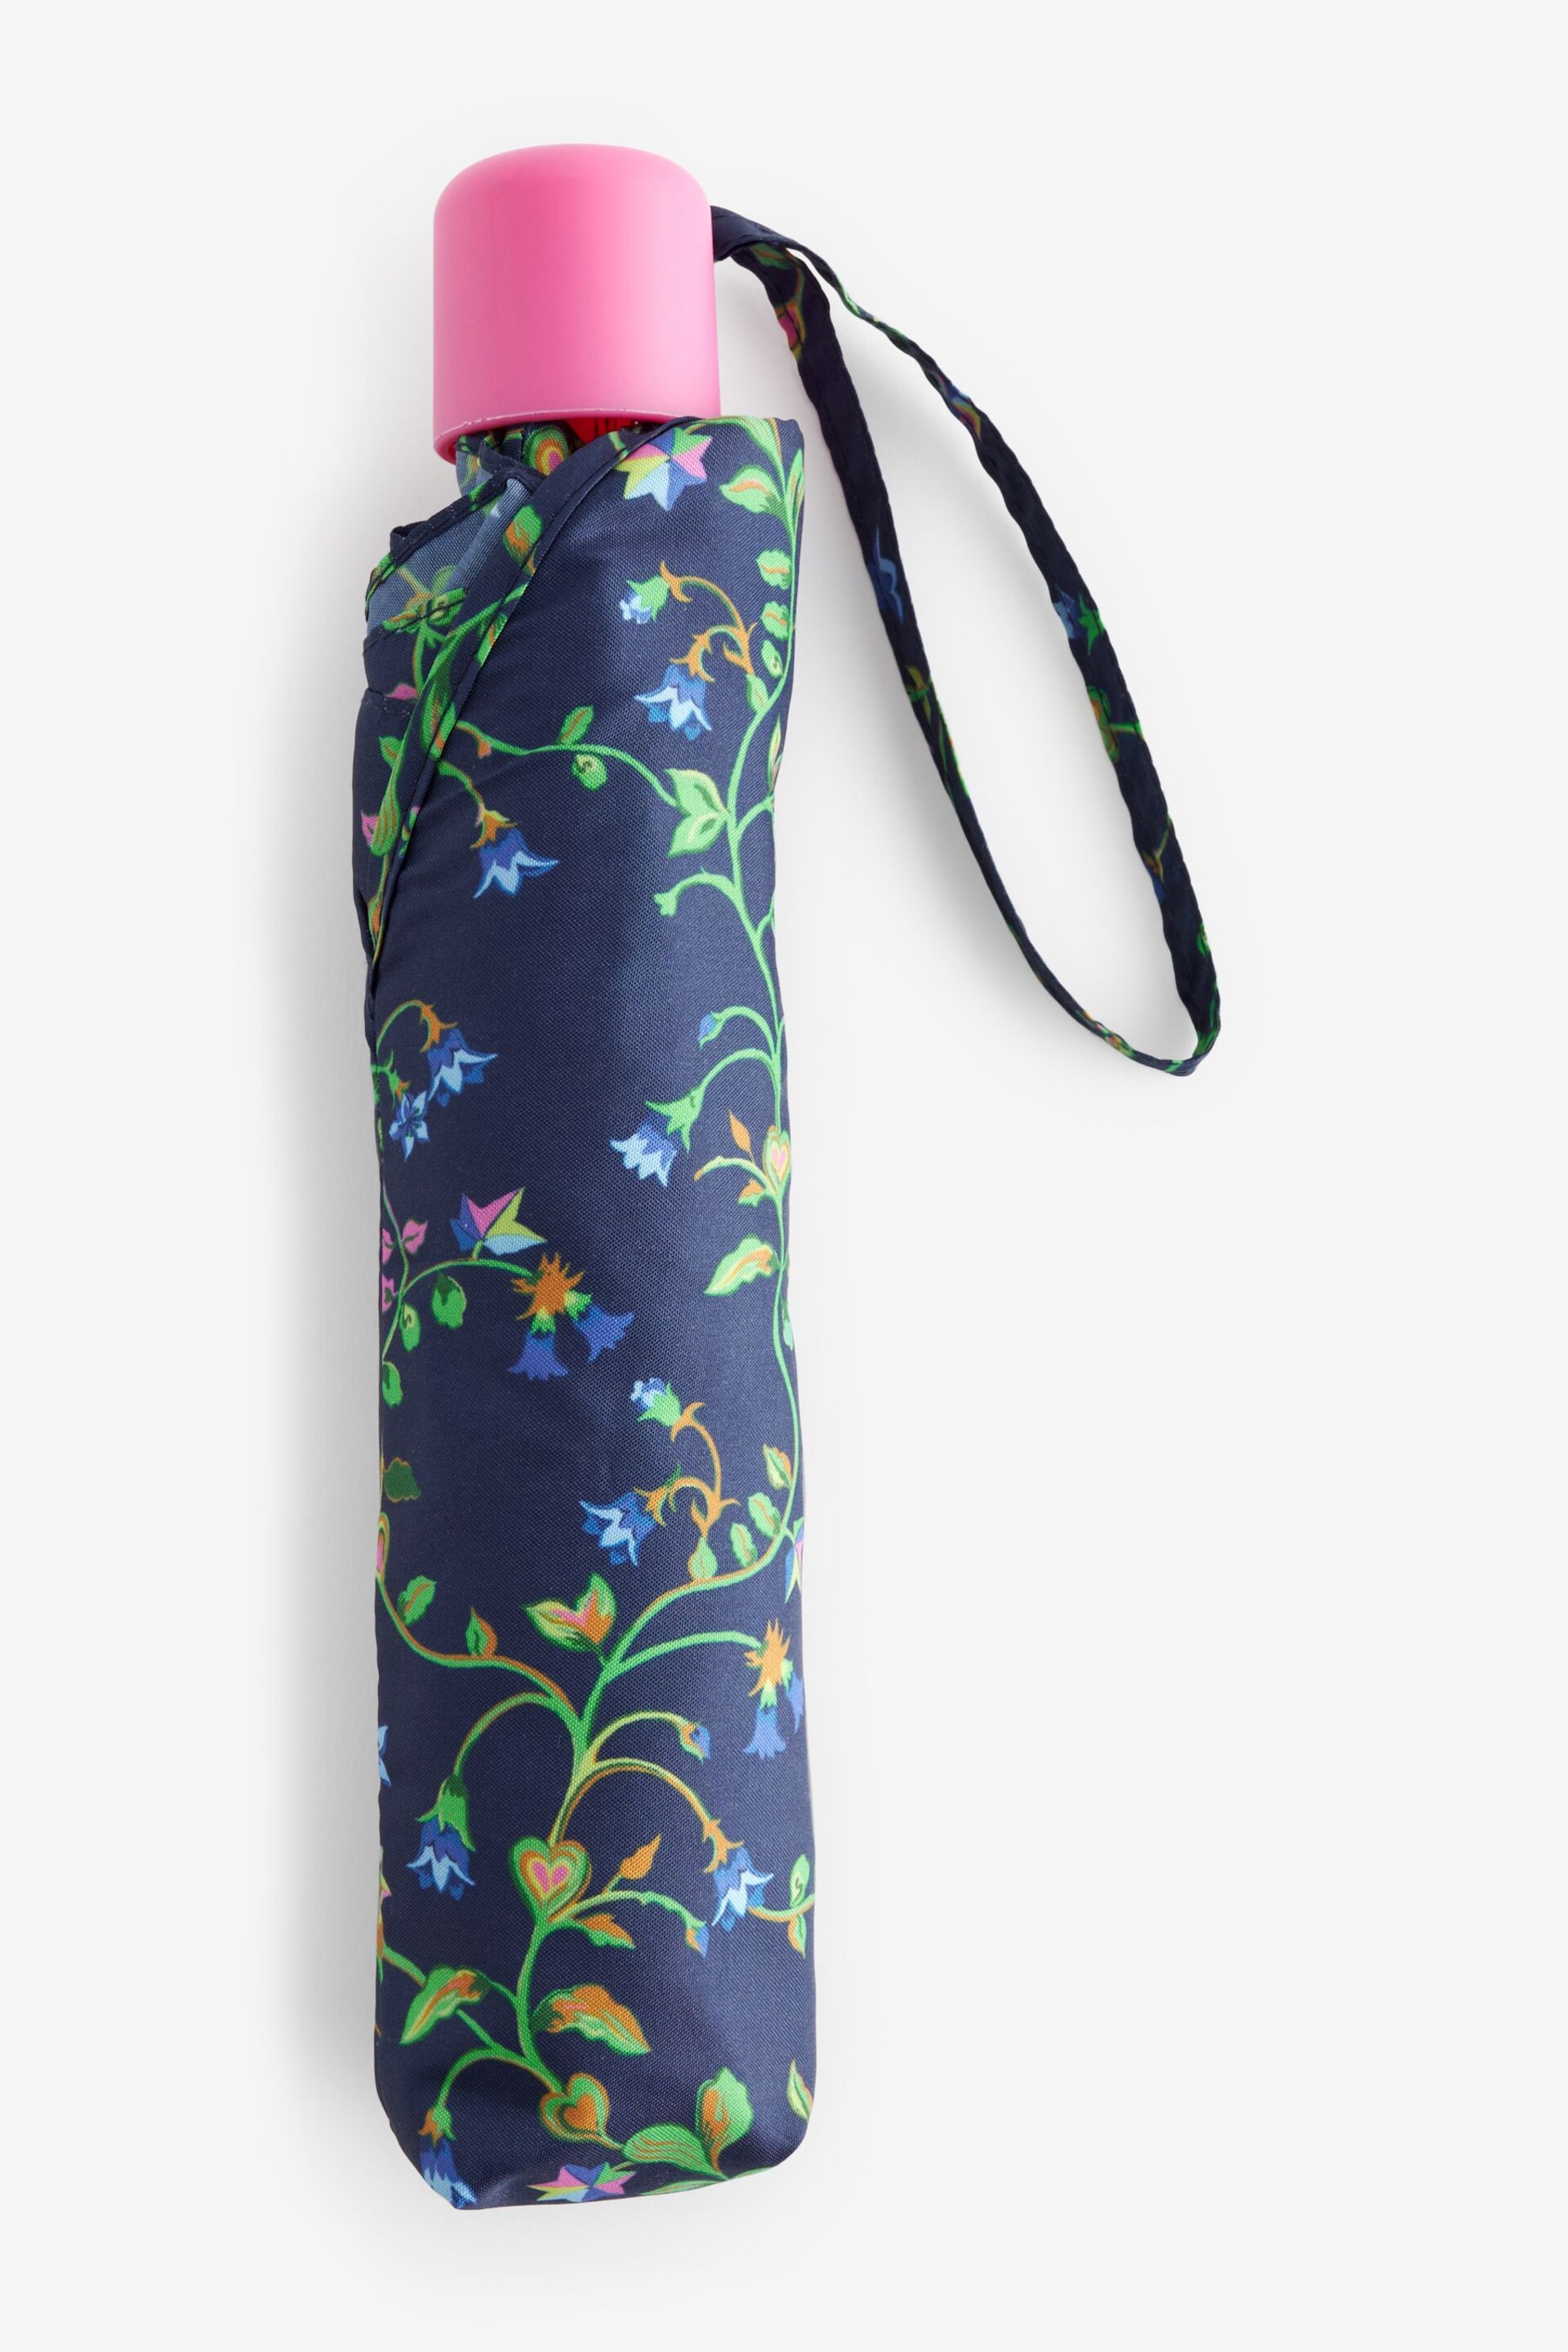 Cath Kidston Navy Floral Print Compact Umbrella - Image 2 of 2